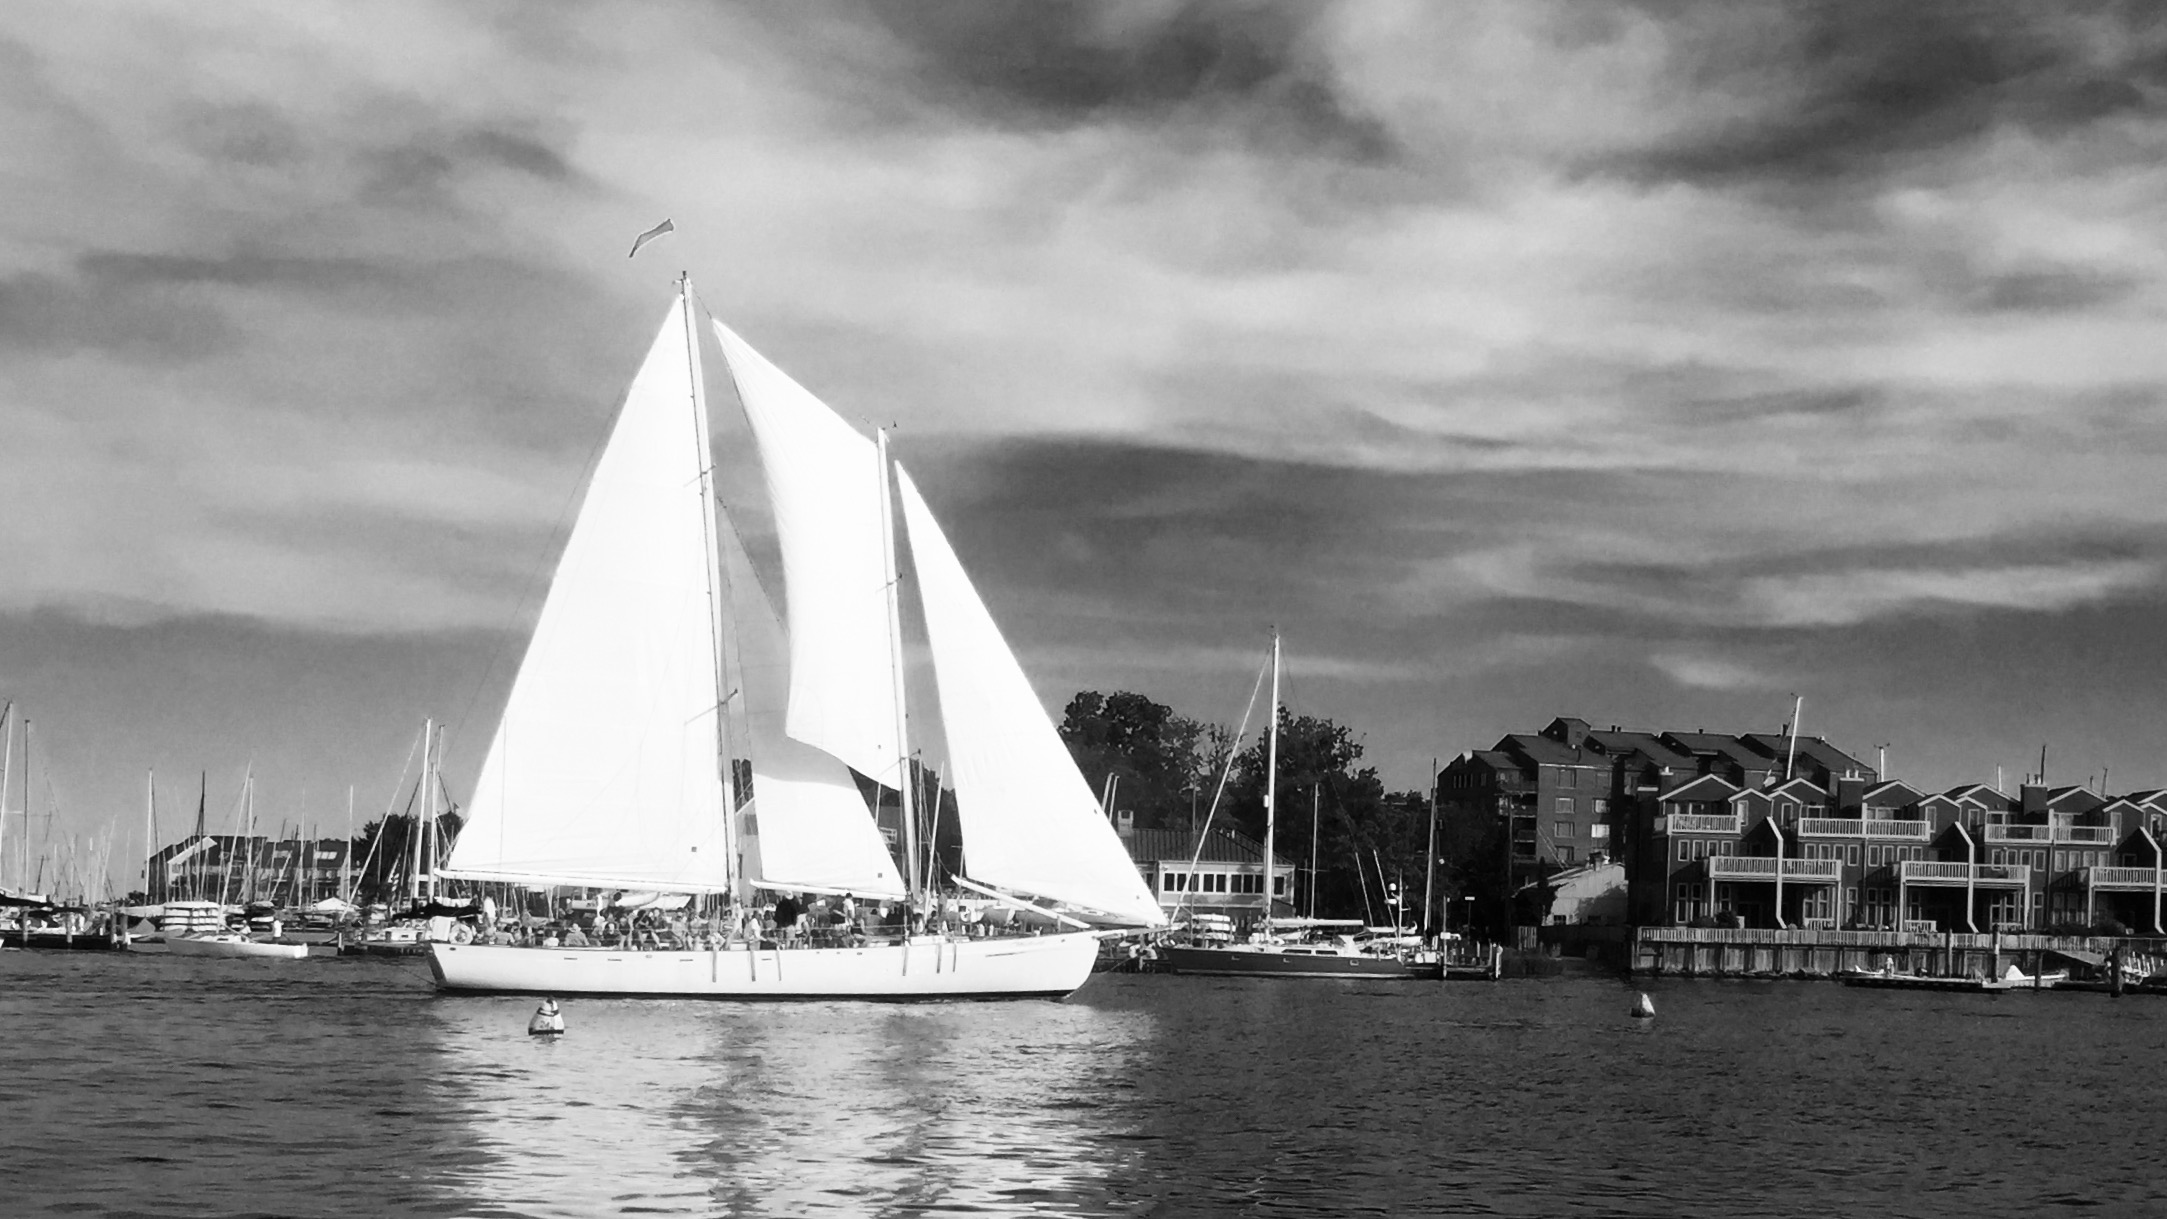 Dramatic black and white picture of the schooner and landscape behind it